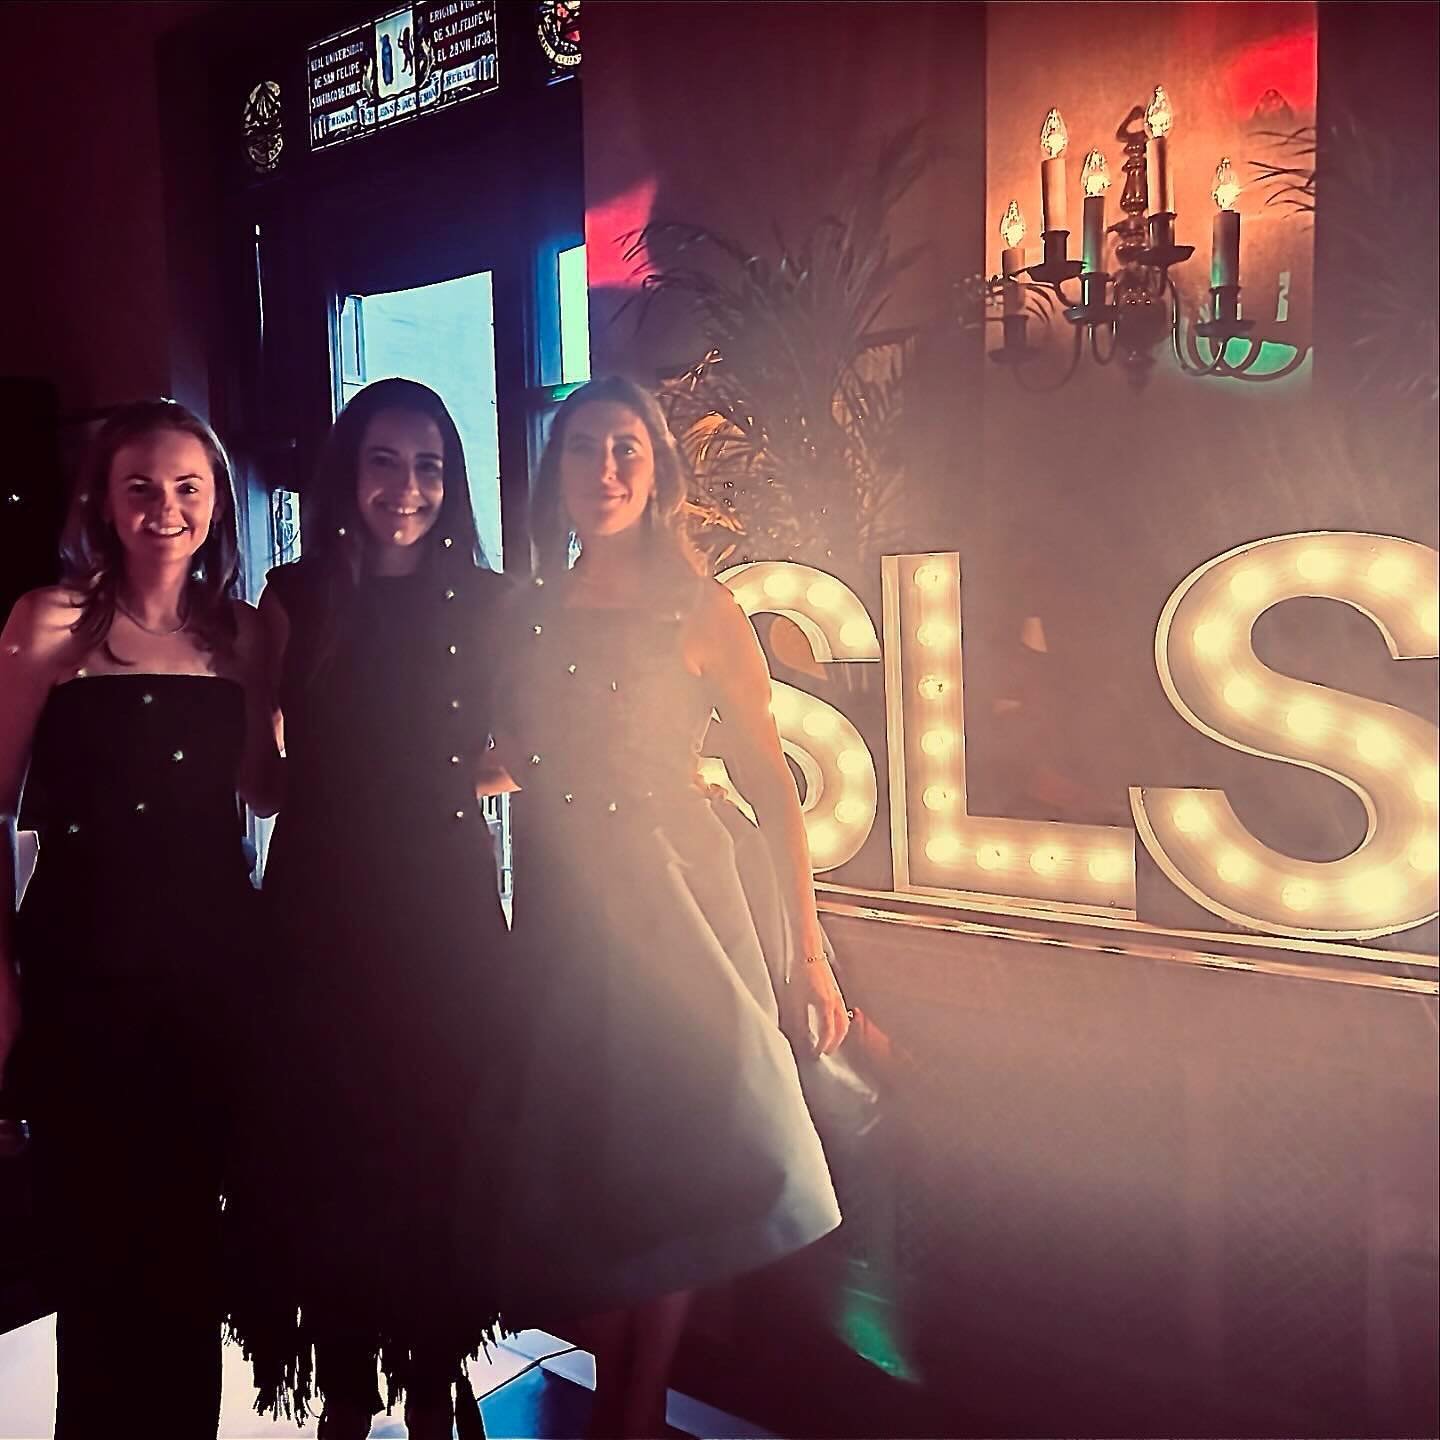 Friday night was a blast. 💥 SLS Spring Social 2024 will be a night to remember. Thank you to the chairs Katie Spalding, Lucila Nolan, and Rachel Fishman for their dedication and hard work to put on such a wonderful party. To everyone else behind the